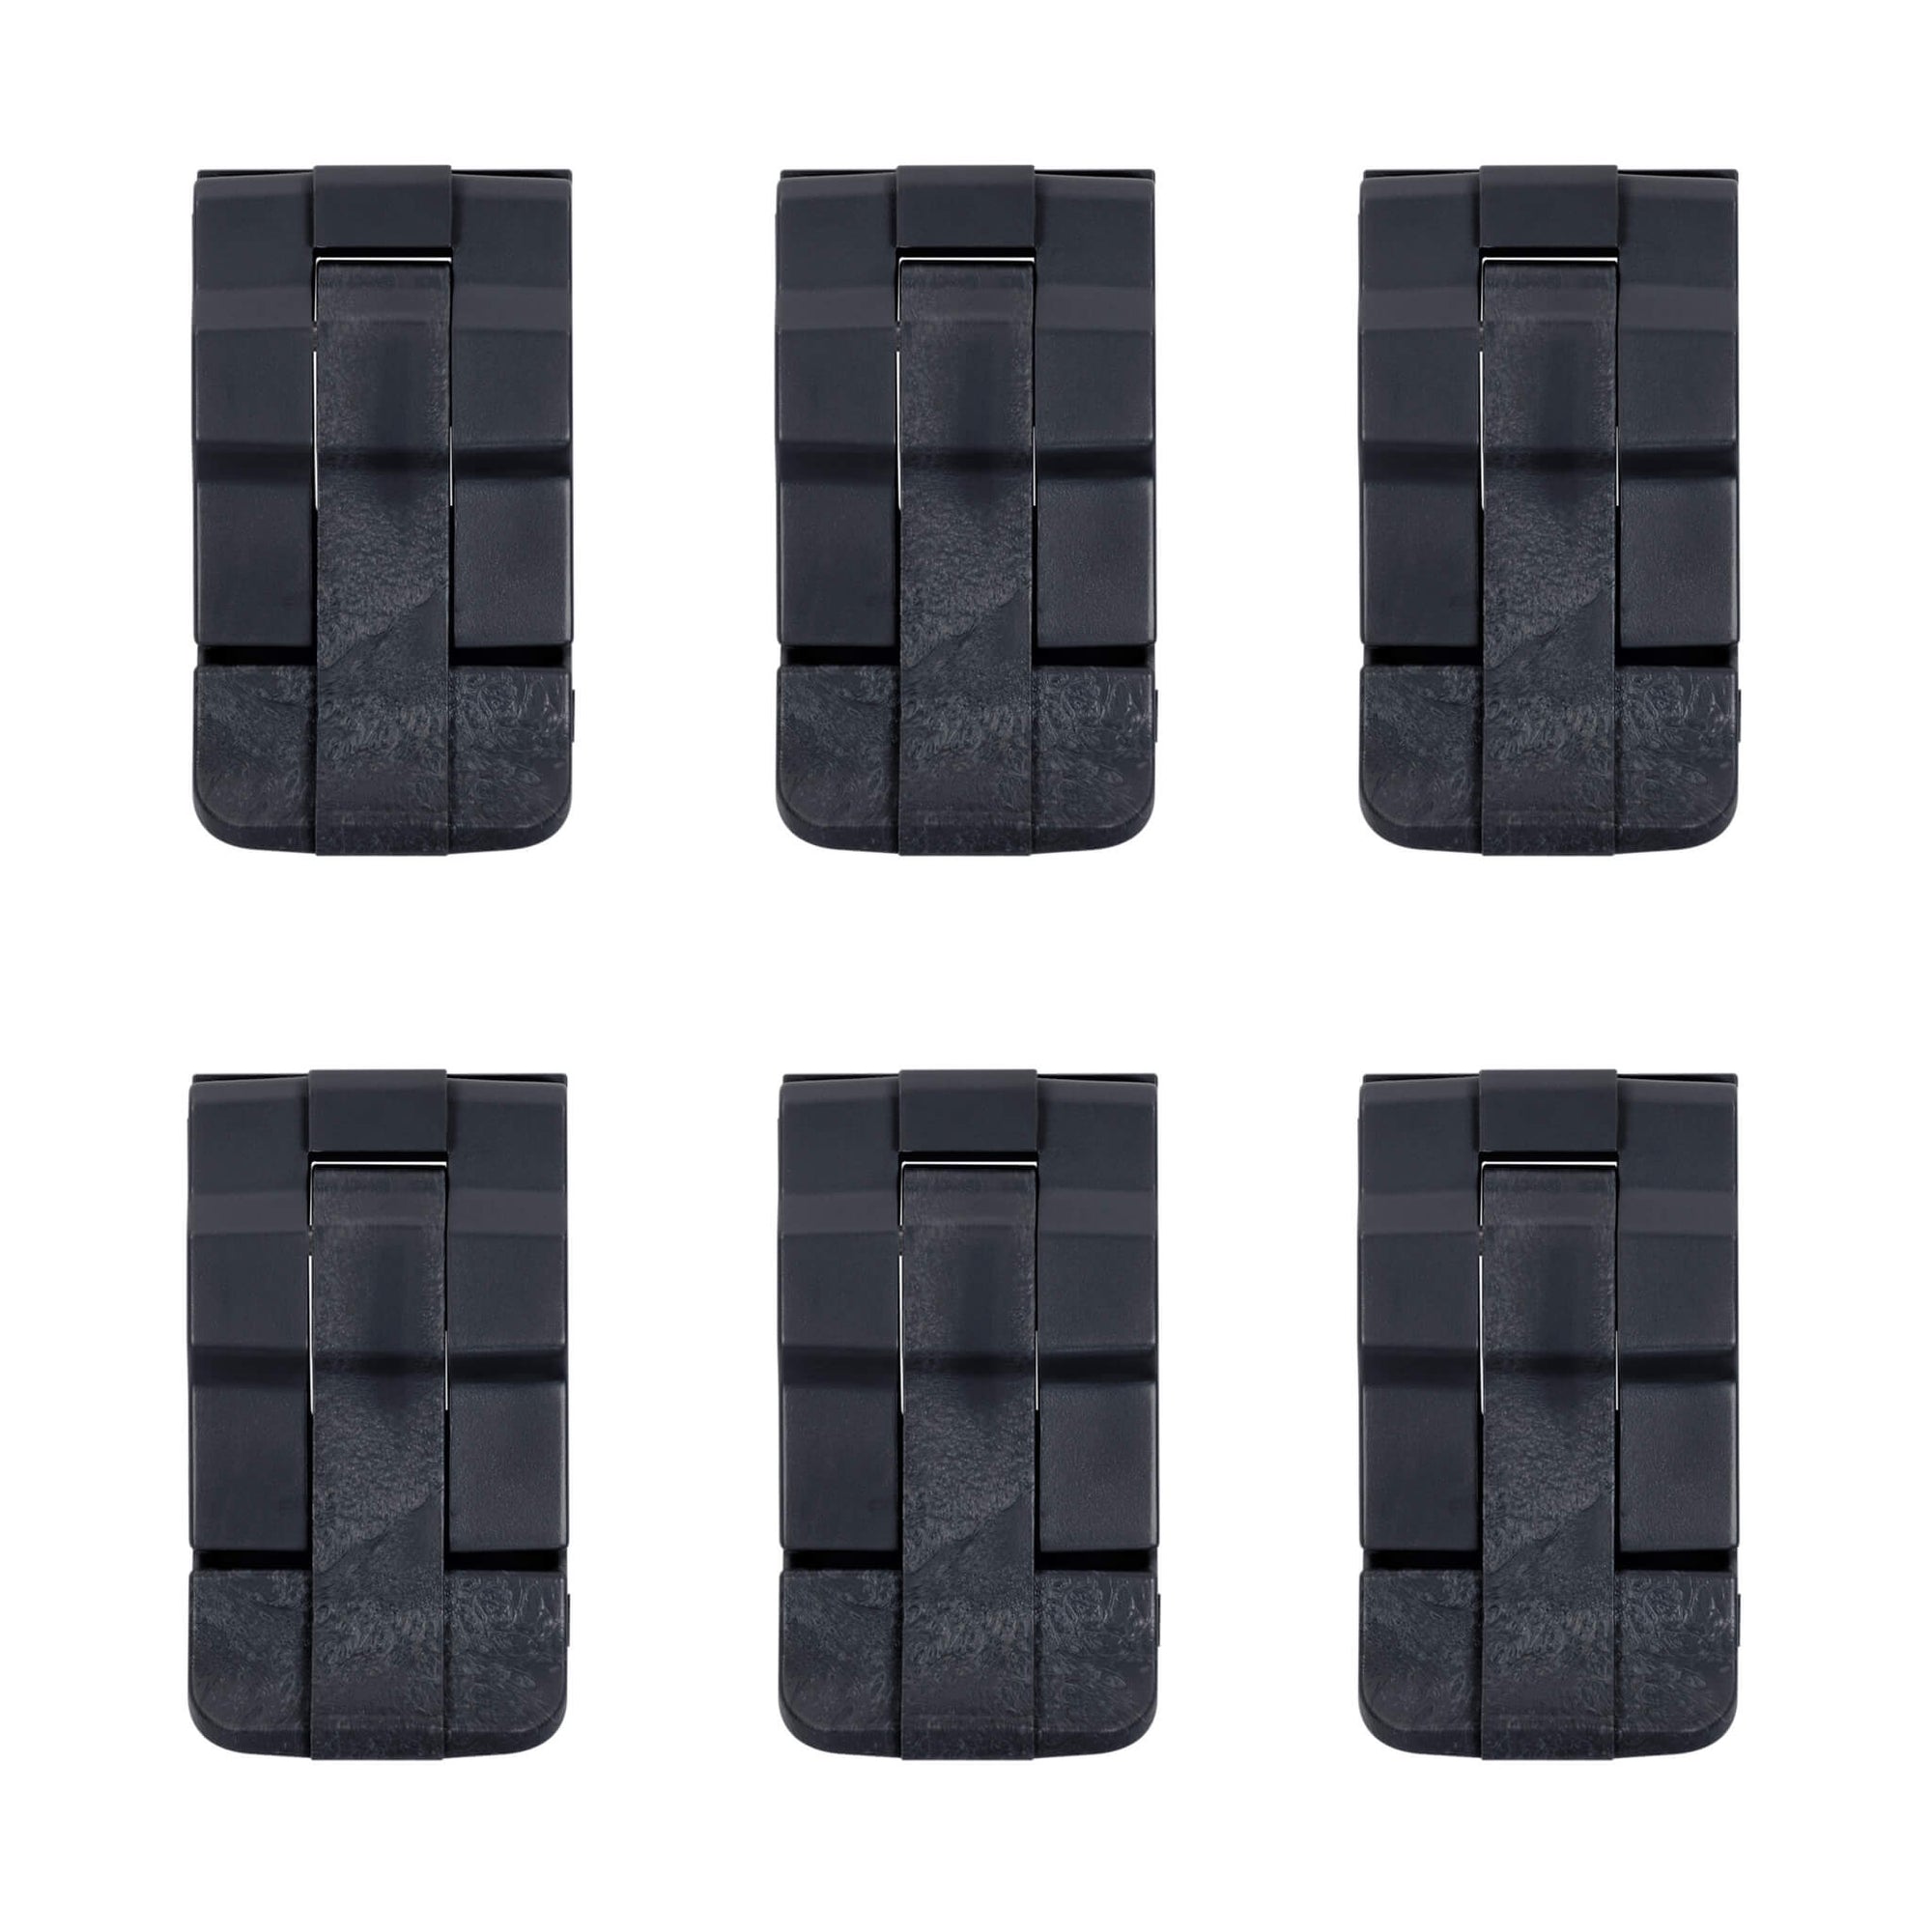 Pelican 0350 Replacement Latches, Black (Set of 6) ColorCase 